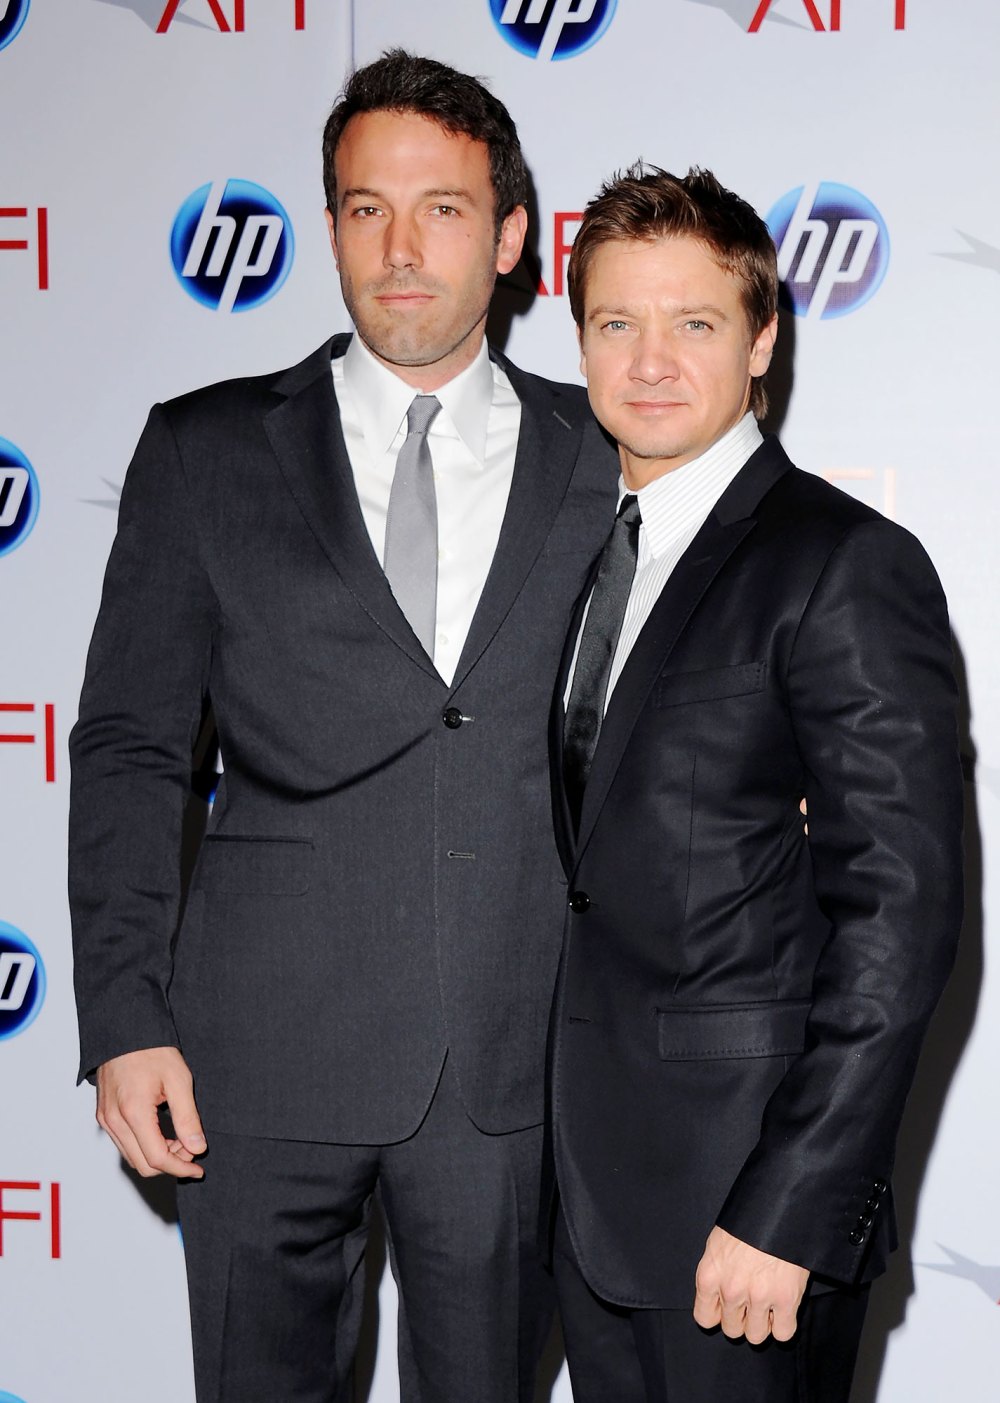 Ben Affleck Once Recruited Boston Inmates to Help Jeremy Renner With His Accent for The Town 2